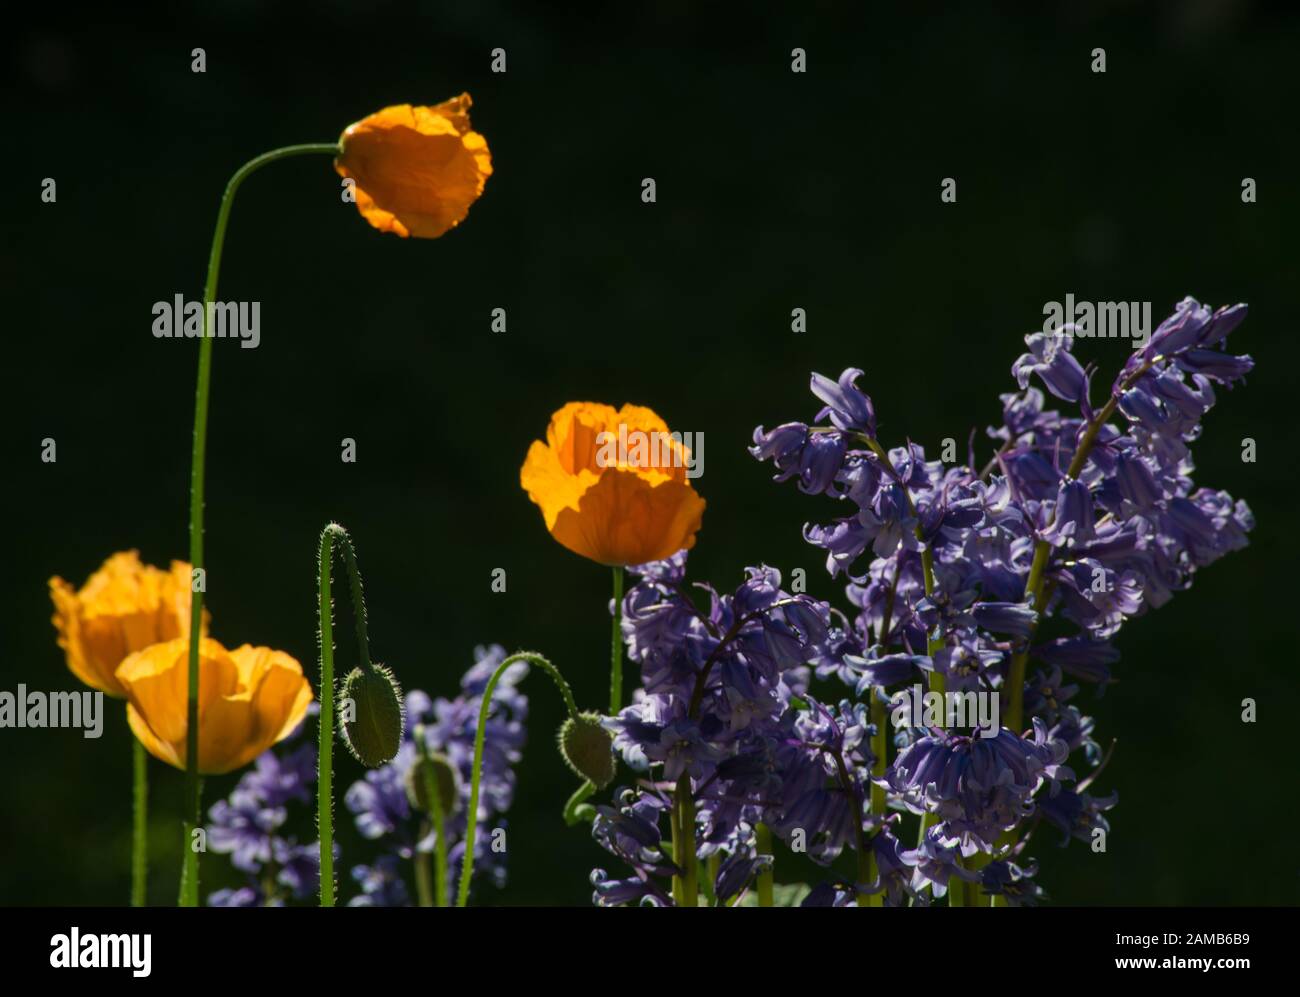 Orange poppies and bluebells with bright sun highlighting the flowers against a dark background Stock Photo